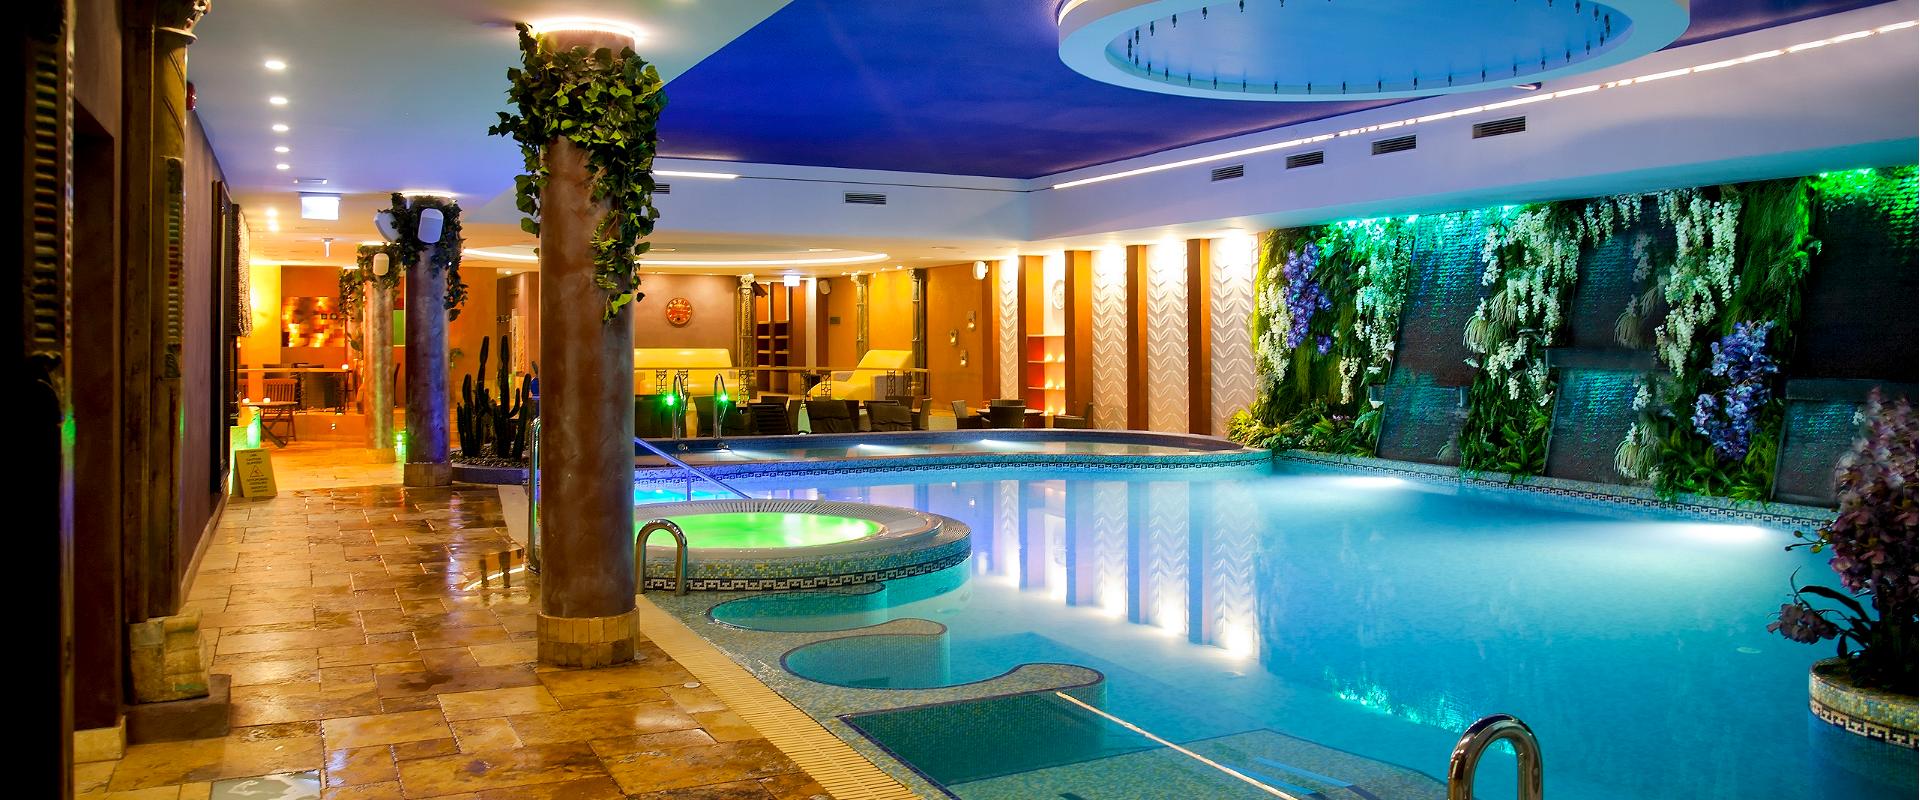 Tallinn Viimsi SPA hotel is located on the beautiful Viimsi Peninsula, only 12 km from Tallinns city centre. Guests can enjoy our 112 rooms, a beauty 